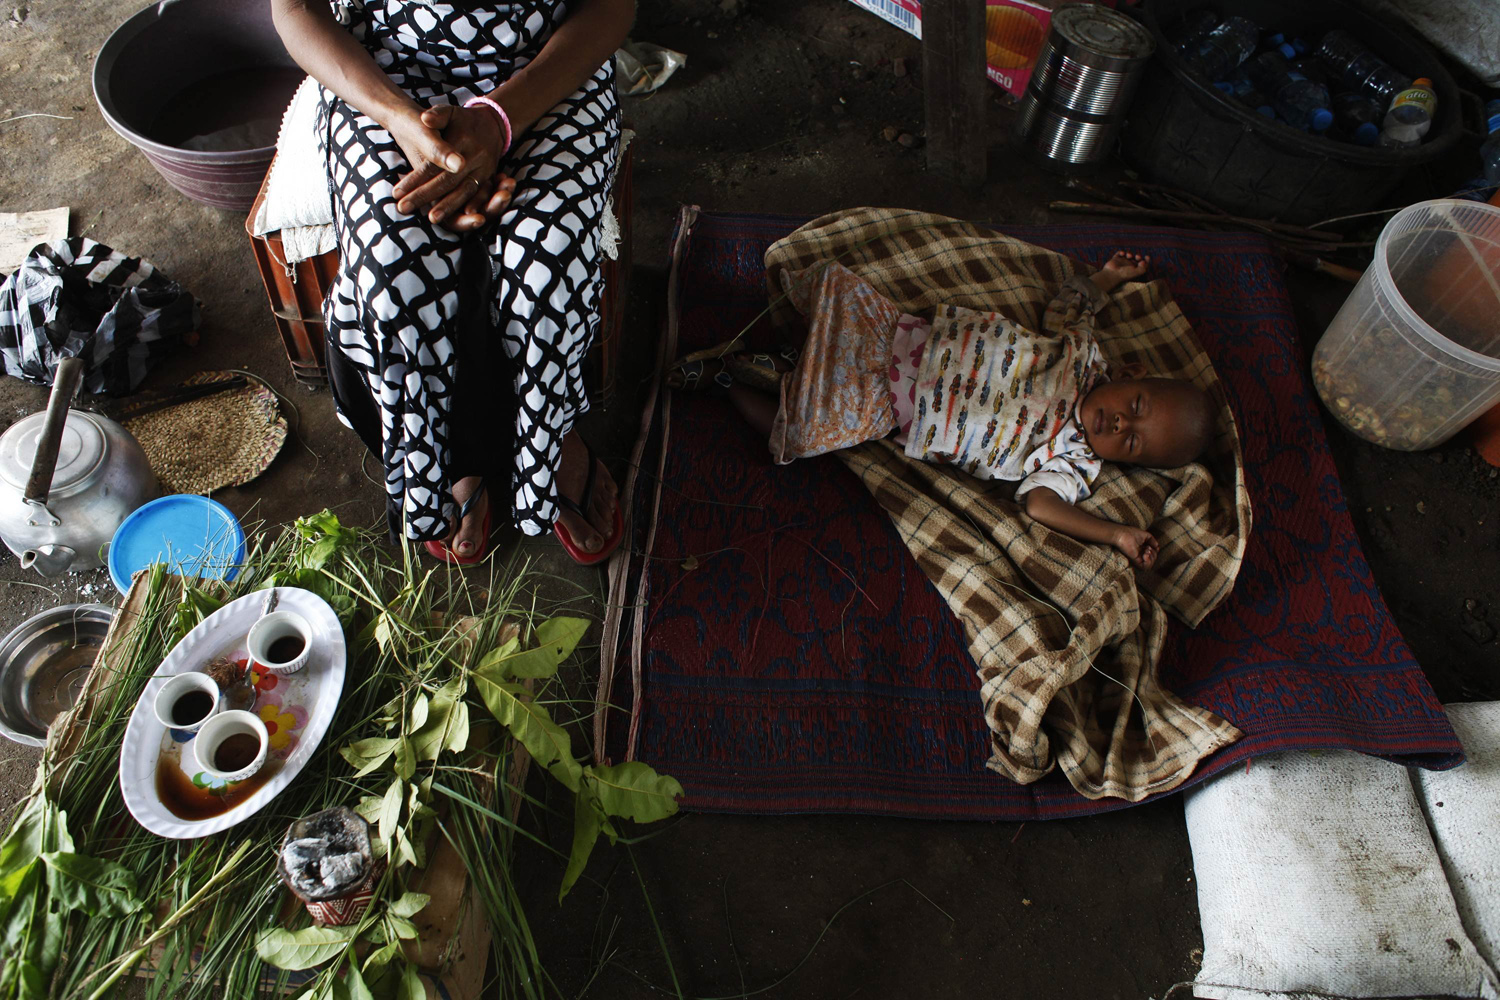 Jul. 8, 2014. An Eritrean baby refugee sleeps on the floor by his mother in a tent inside the UN House IDP camp in Juba.